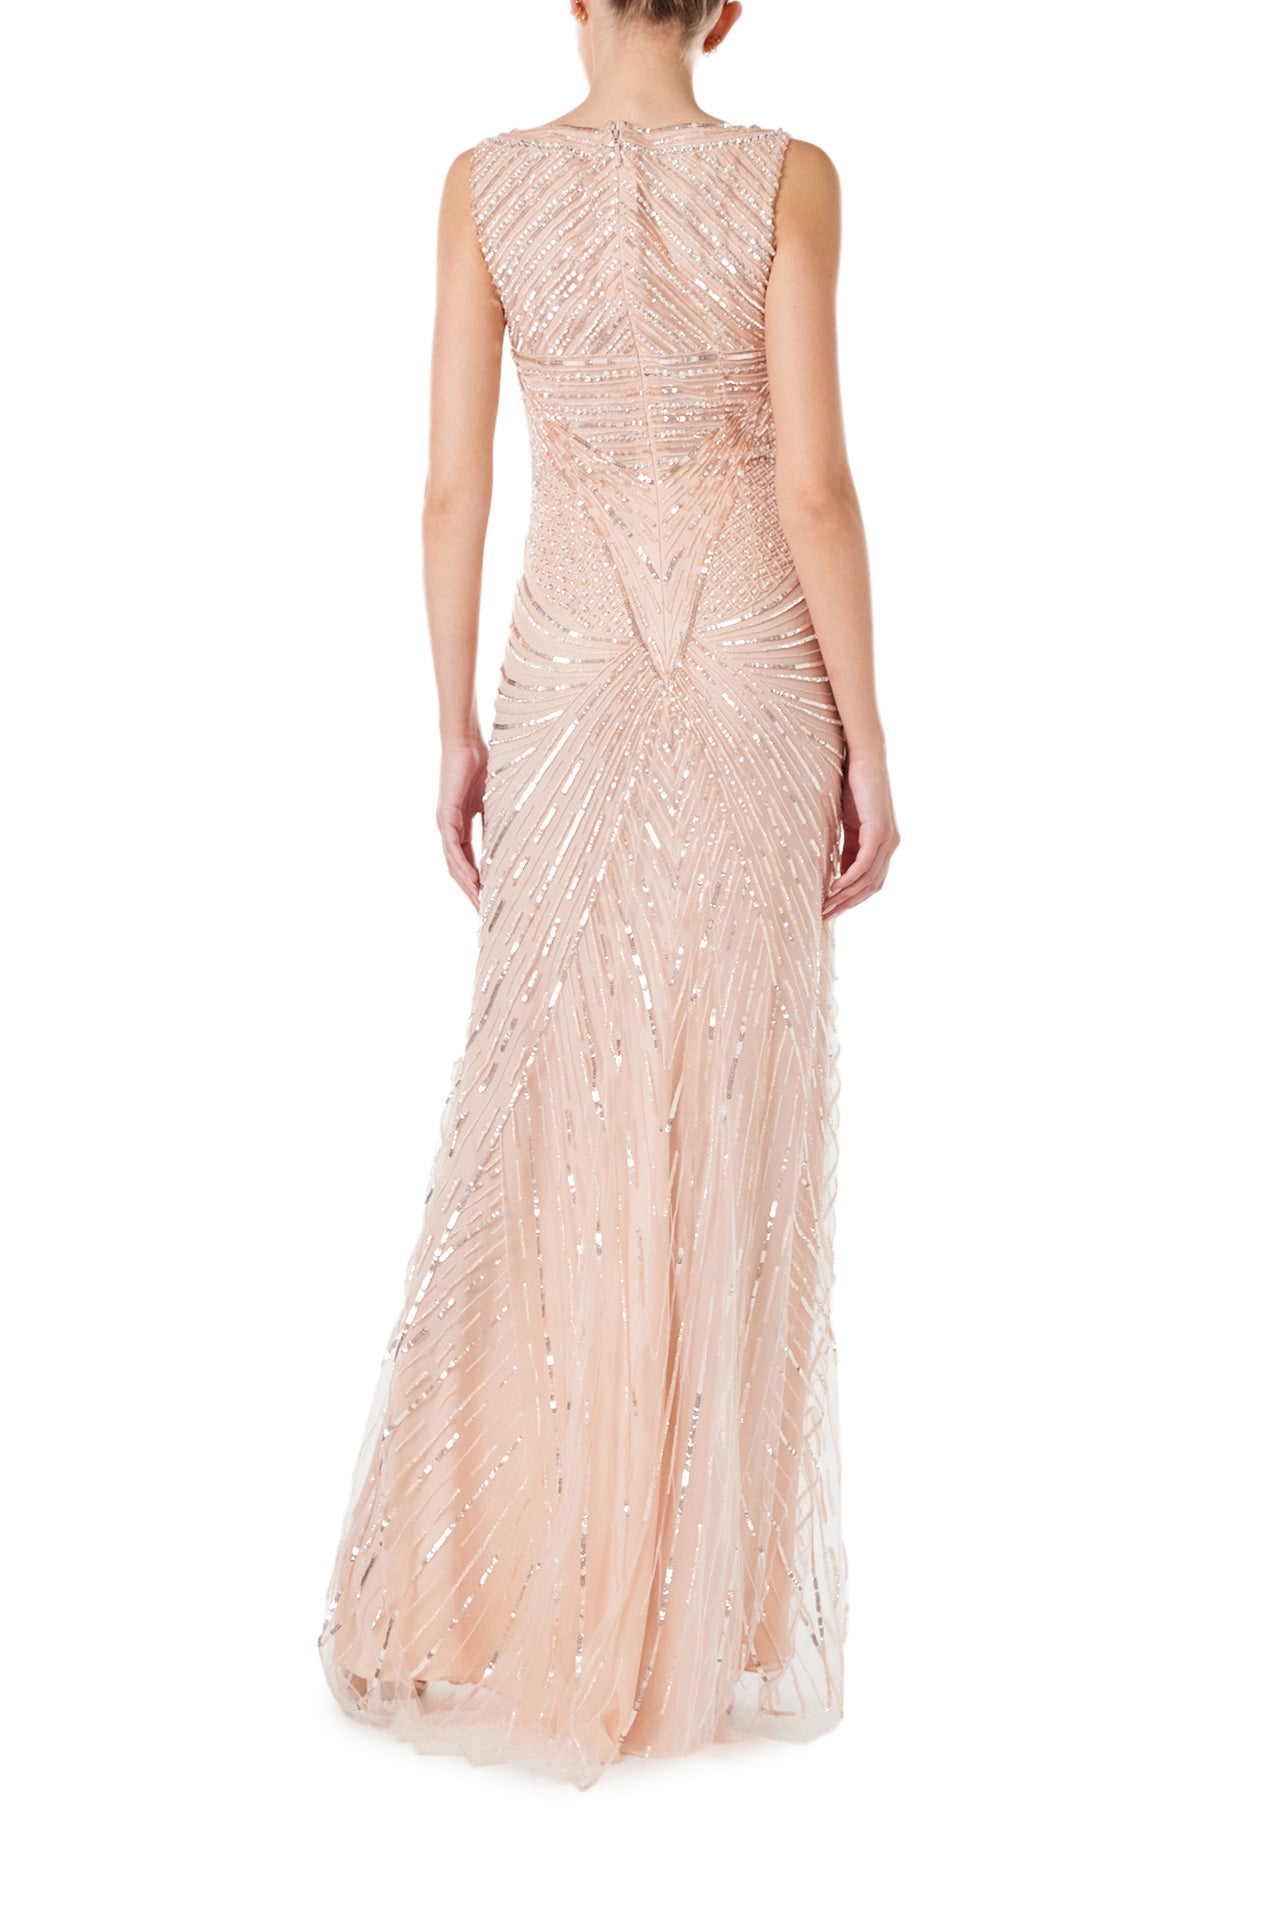 Monique Lhuillier Spring 2024 deep V-neck gown with wide straps in metallic and tonal embroidered tulle - back.